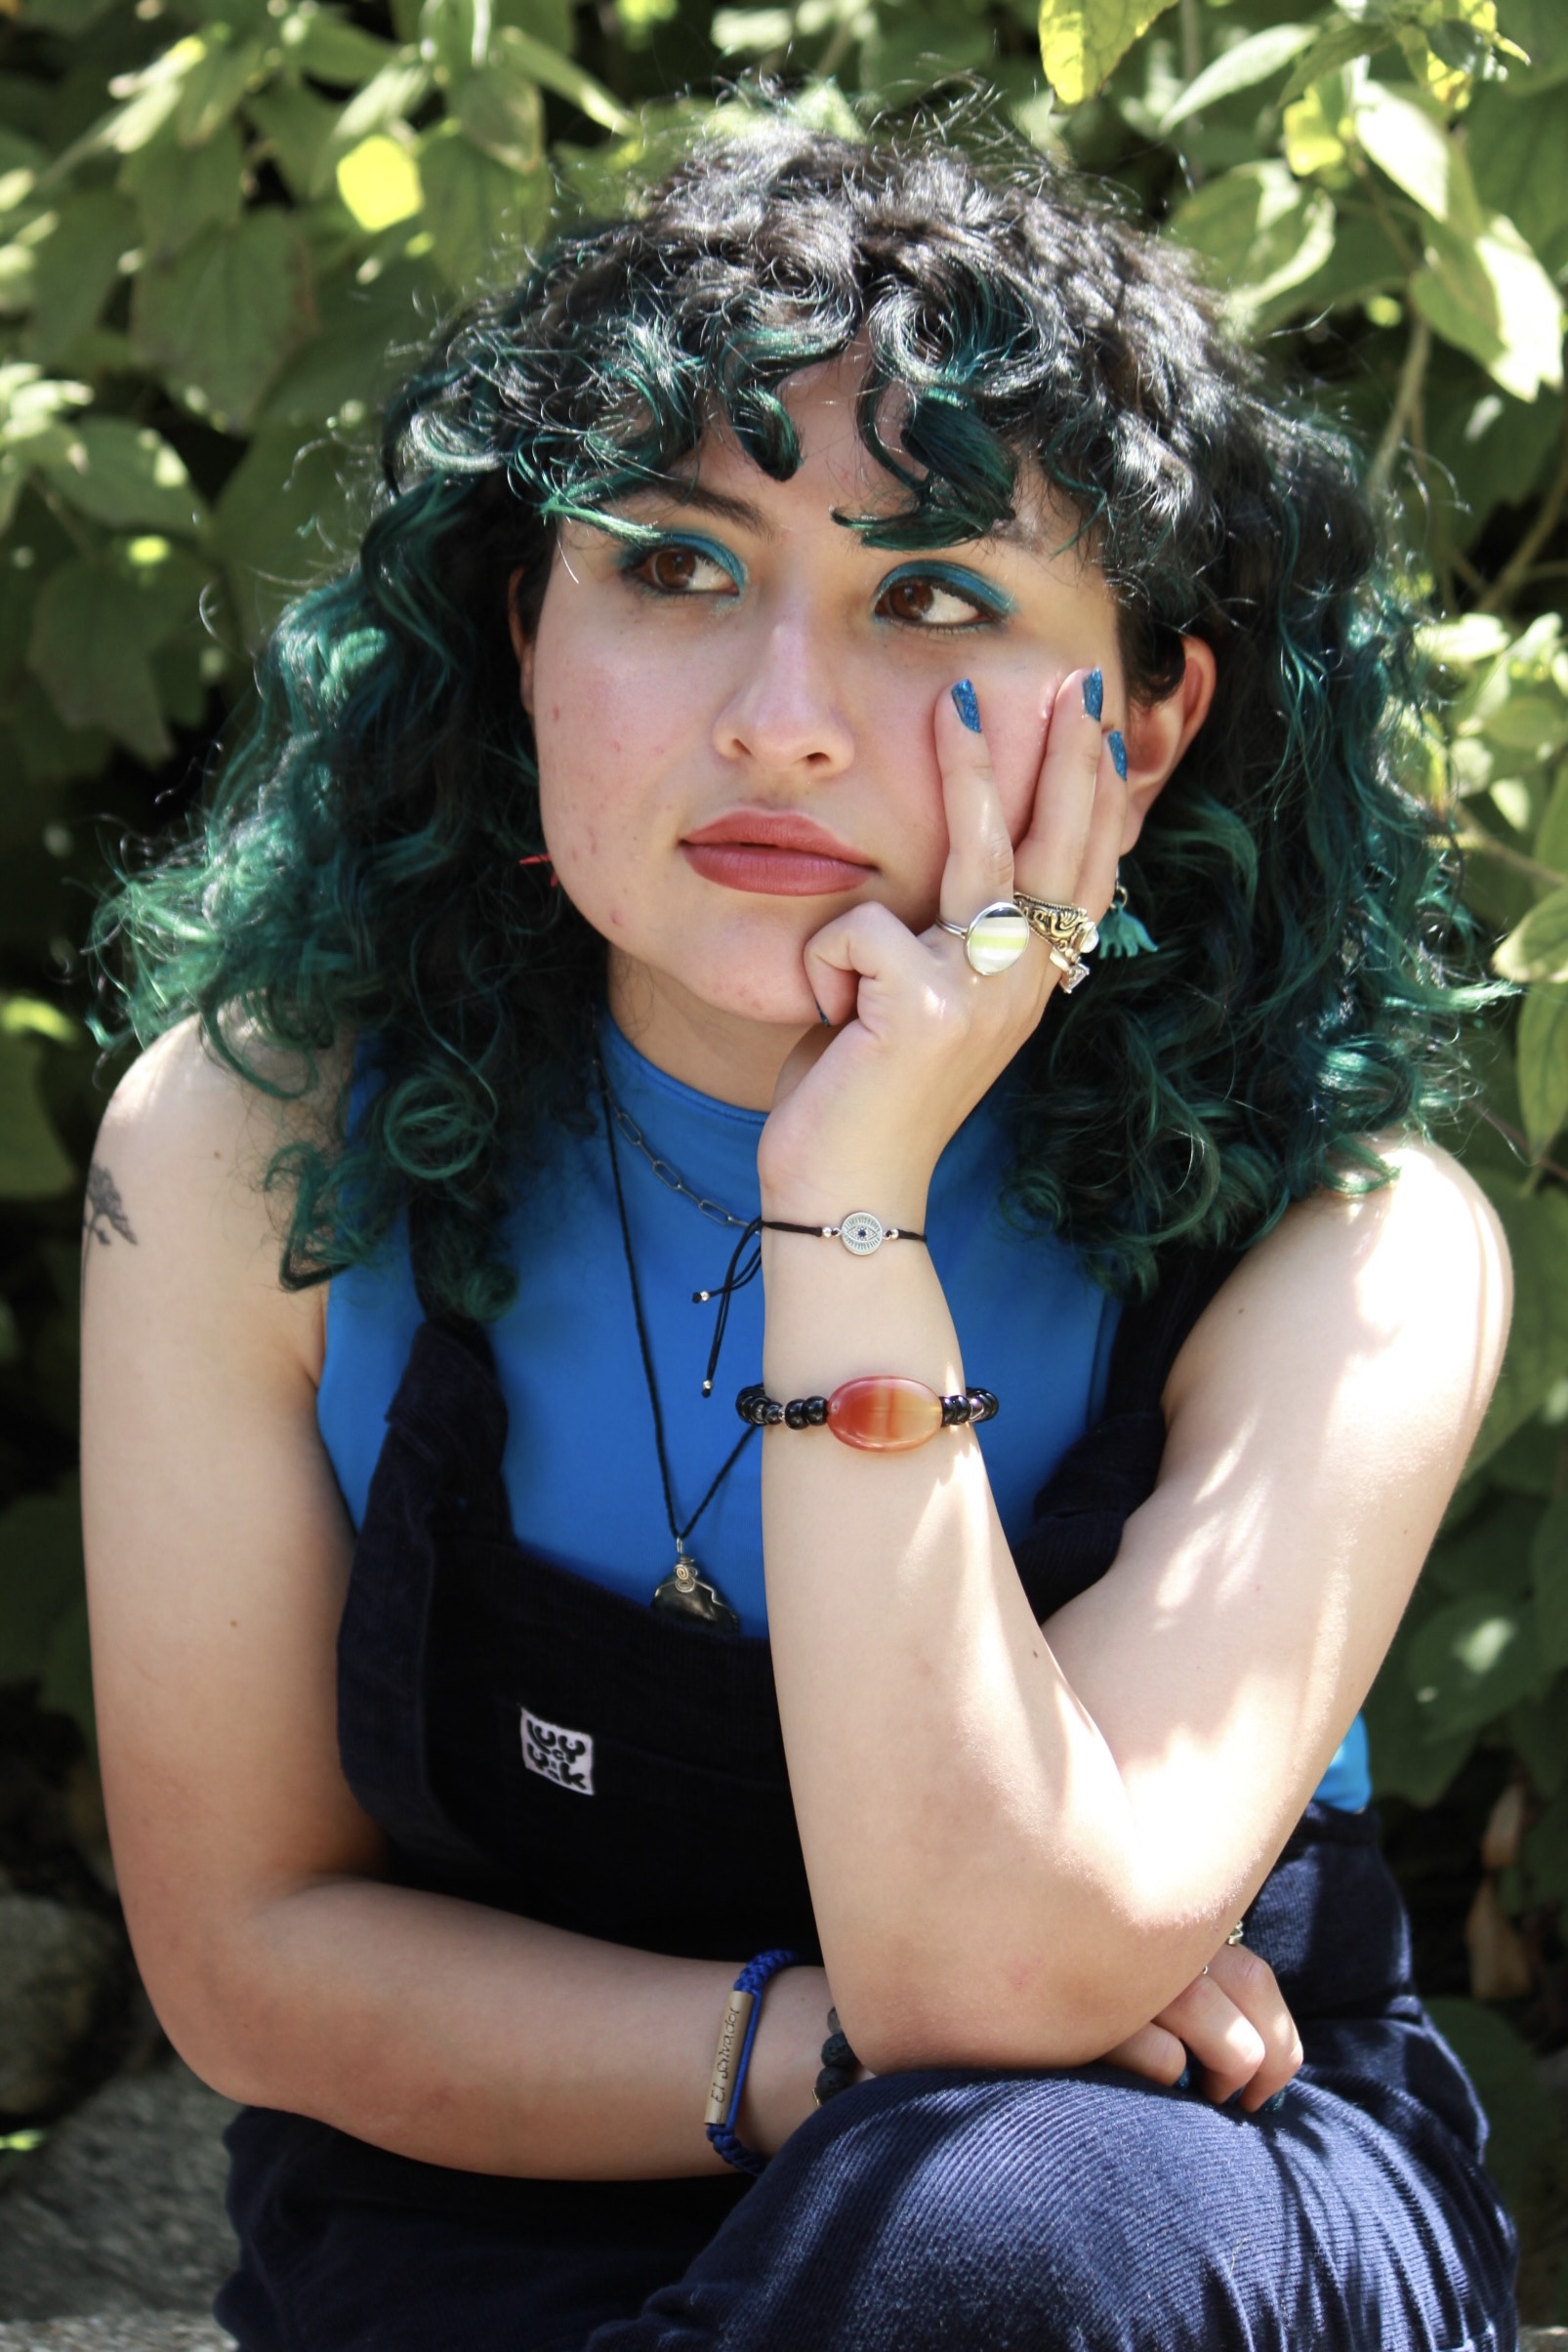 photo of lorely, an agender person with curly black hair and a blue outfit